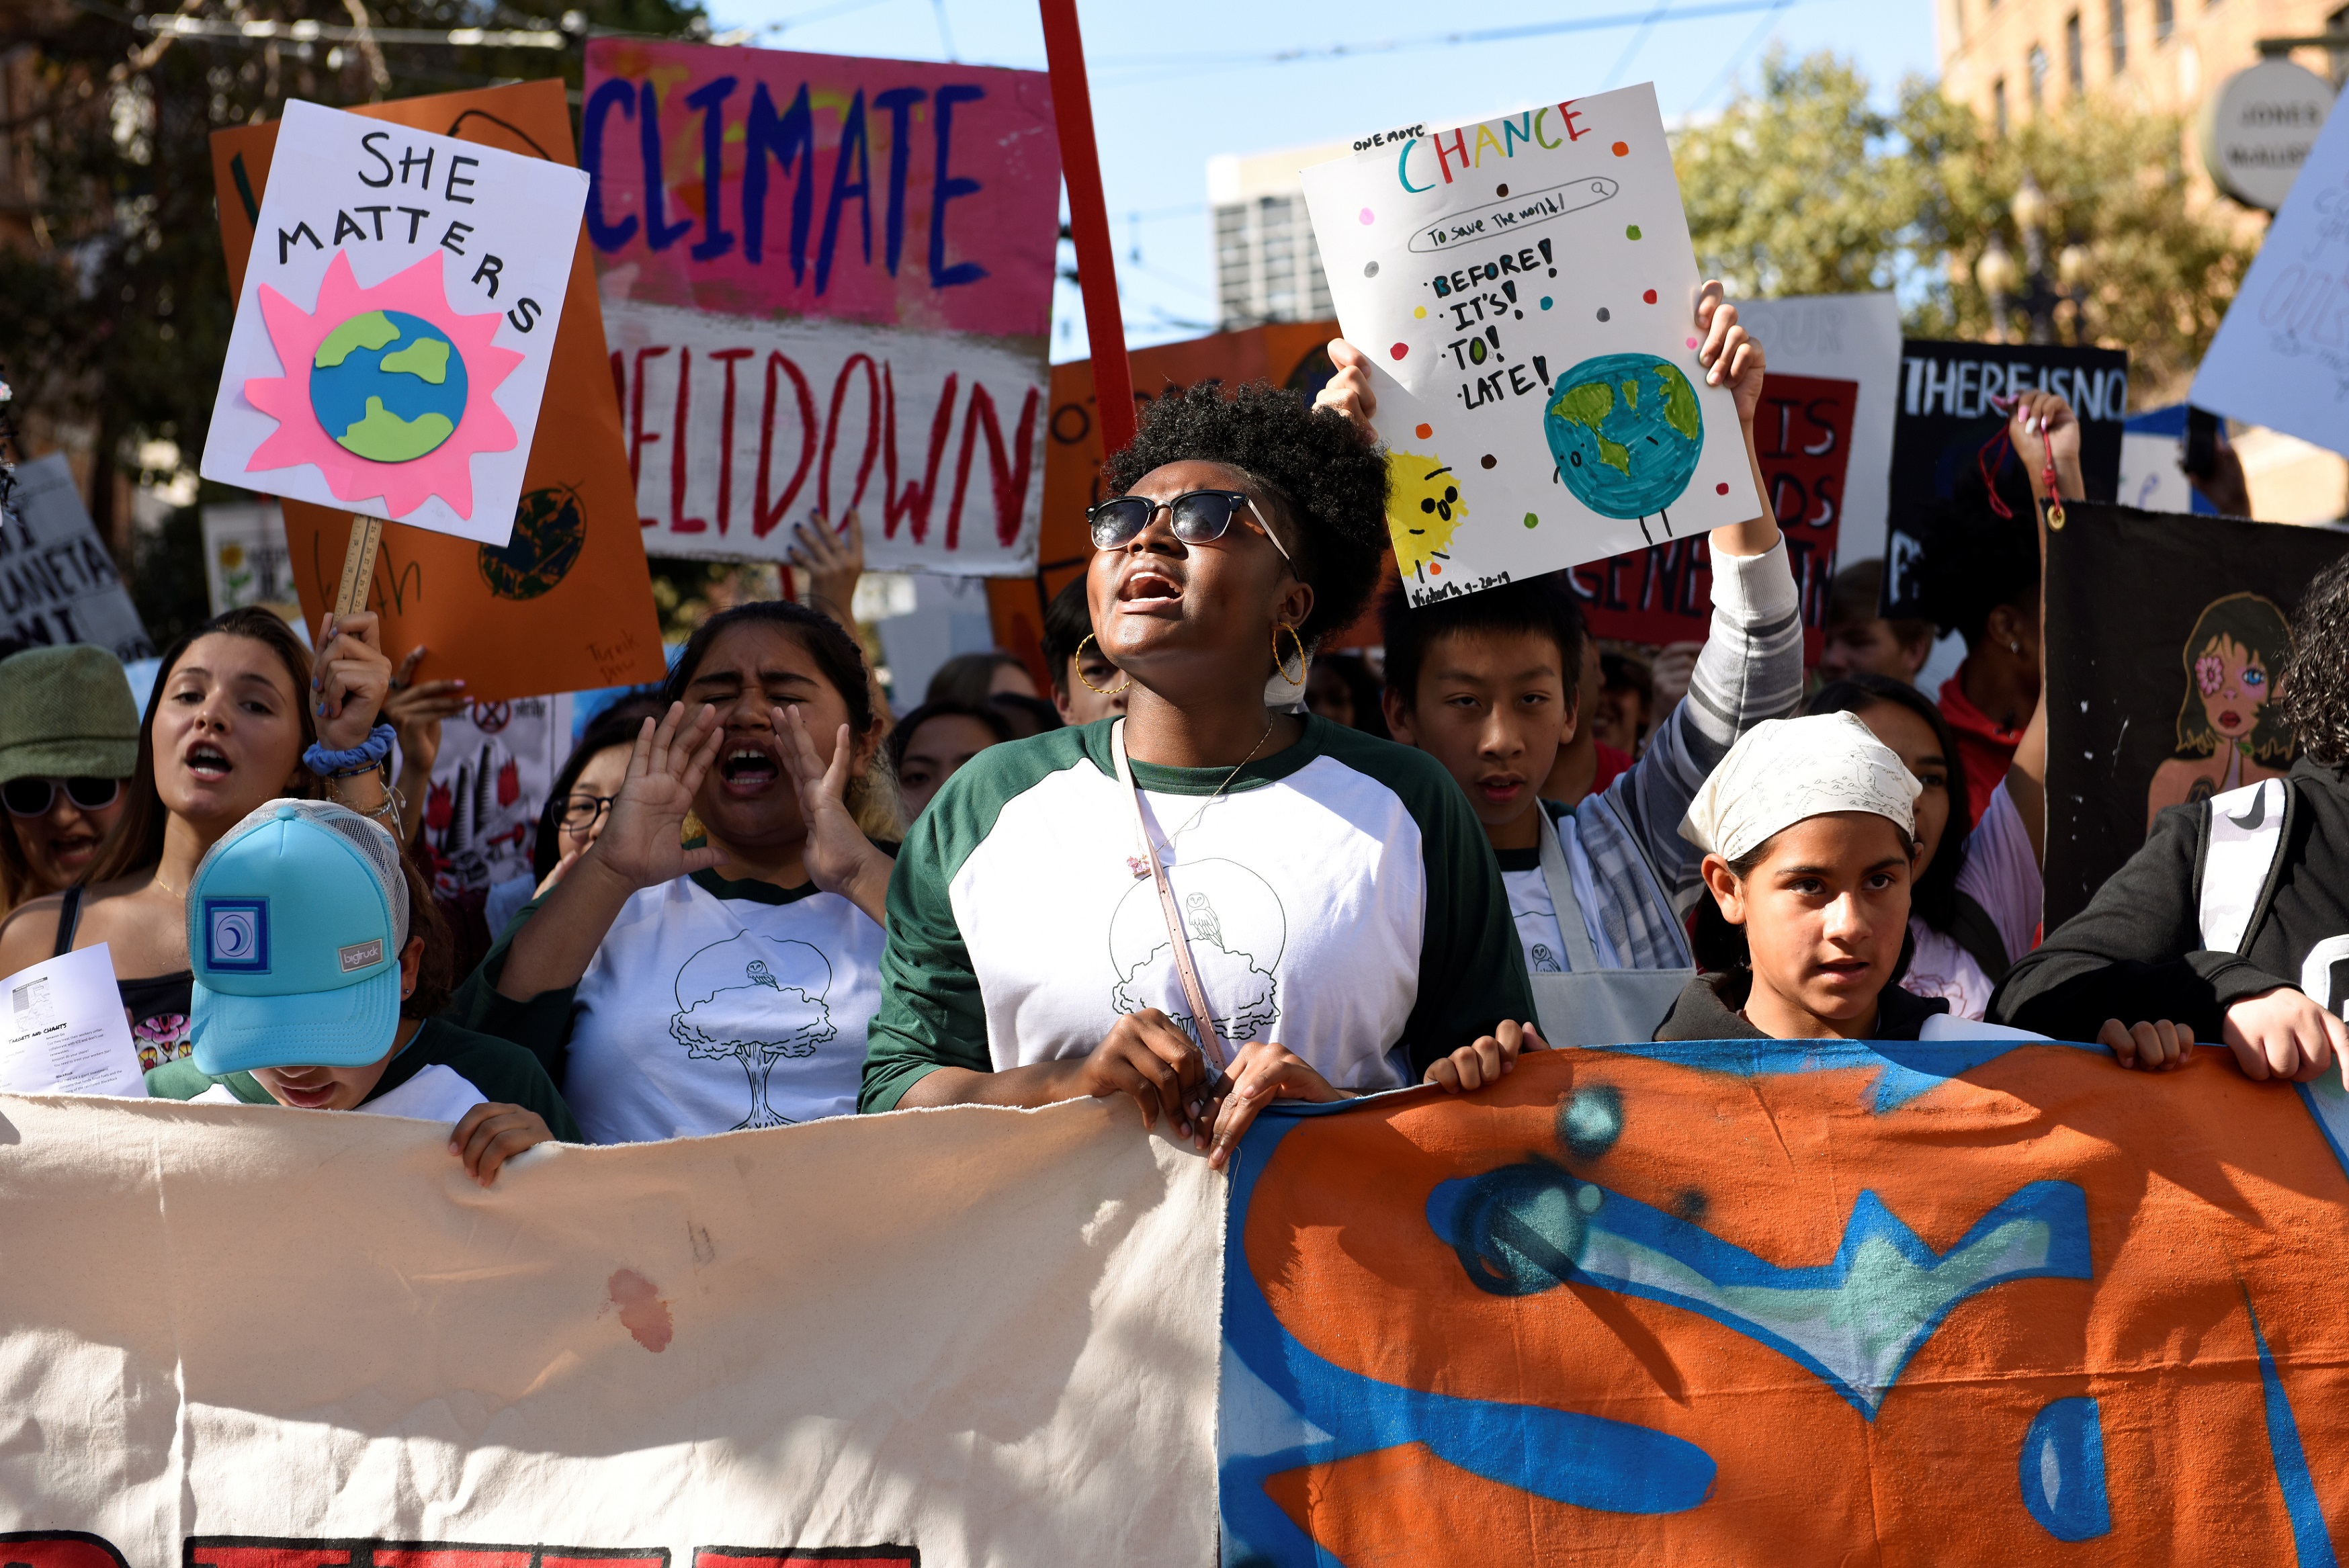 Young people protest during a Climate Strike march in San Francisco, U.S. September 20, 2019. REUTERS/Kate Munsch - RC1C467E3B80